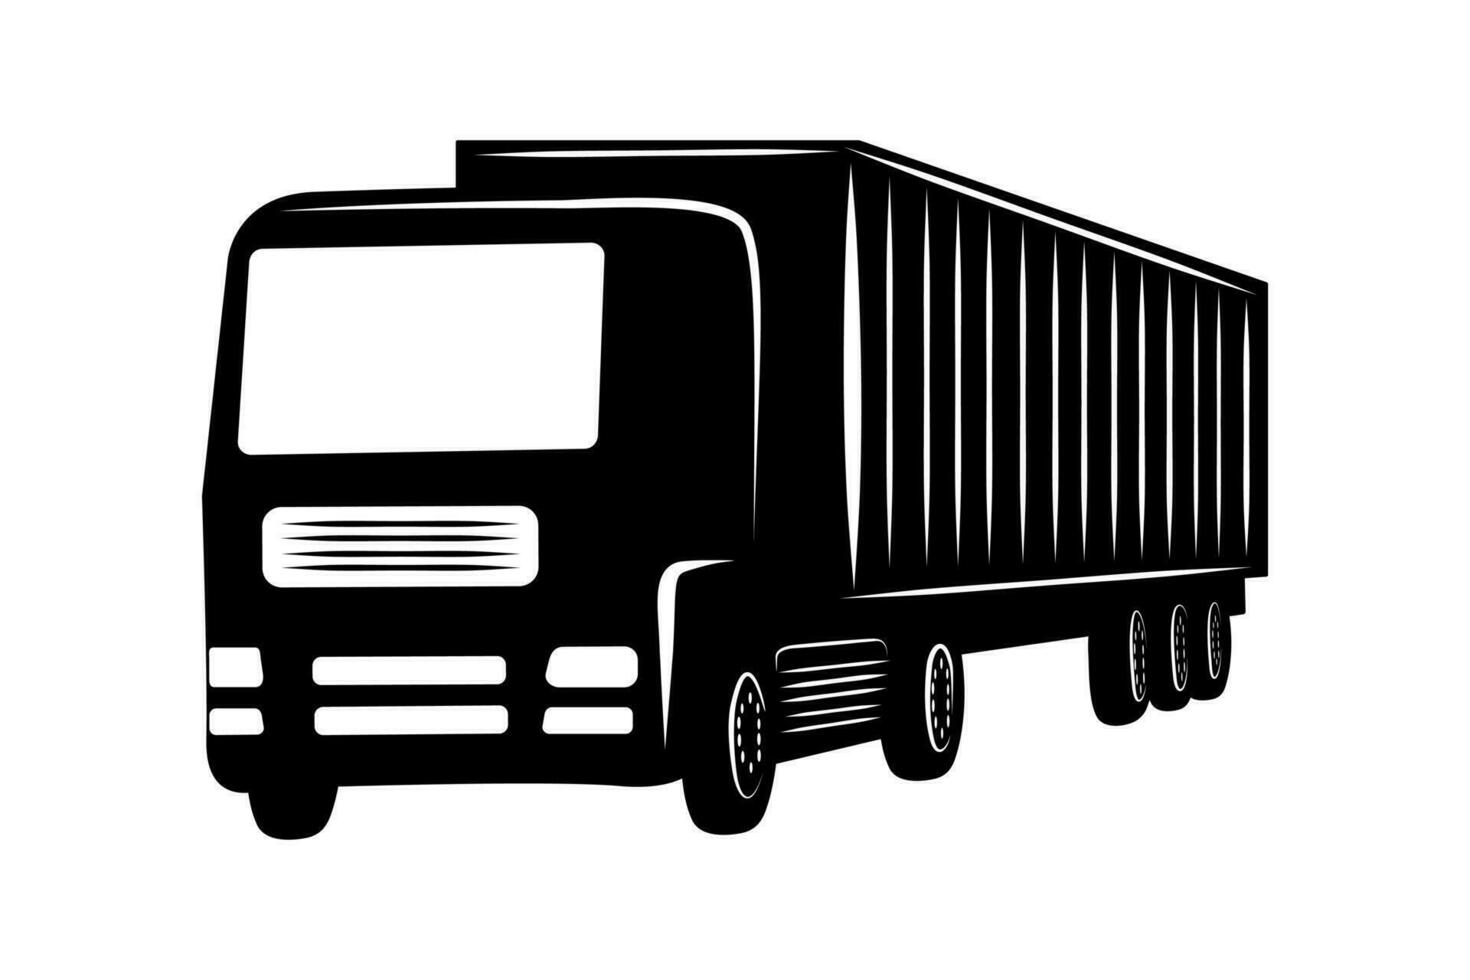 Truck logo design vector black and white colors. Cargo transportation and logistics services